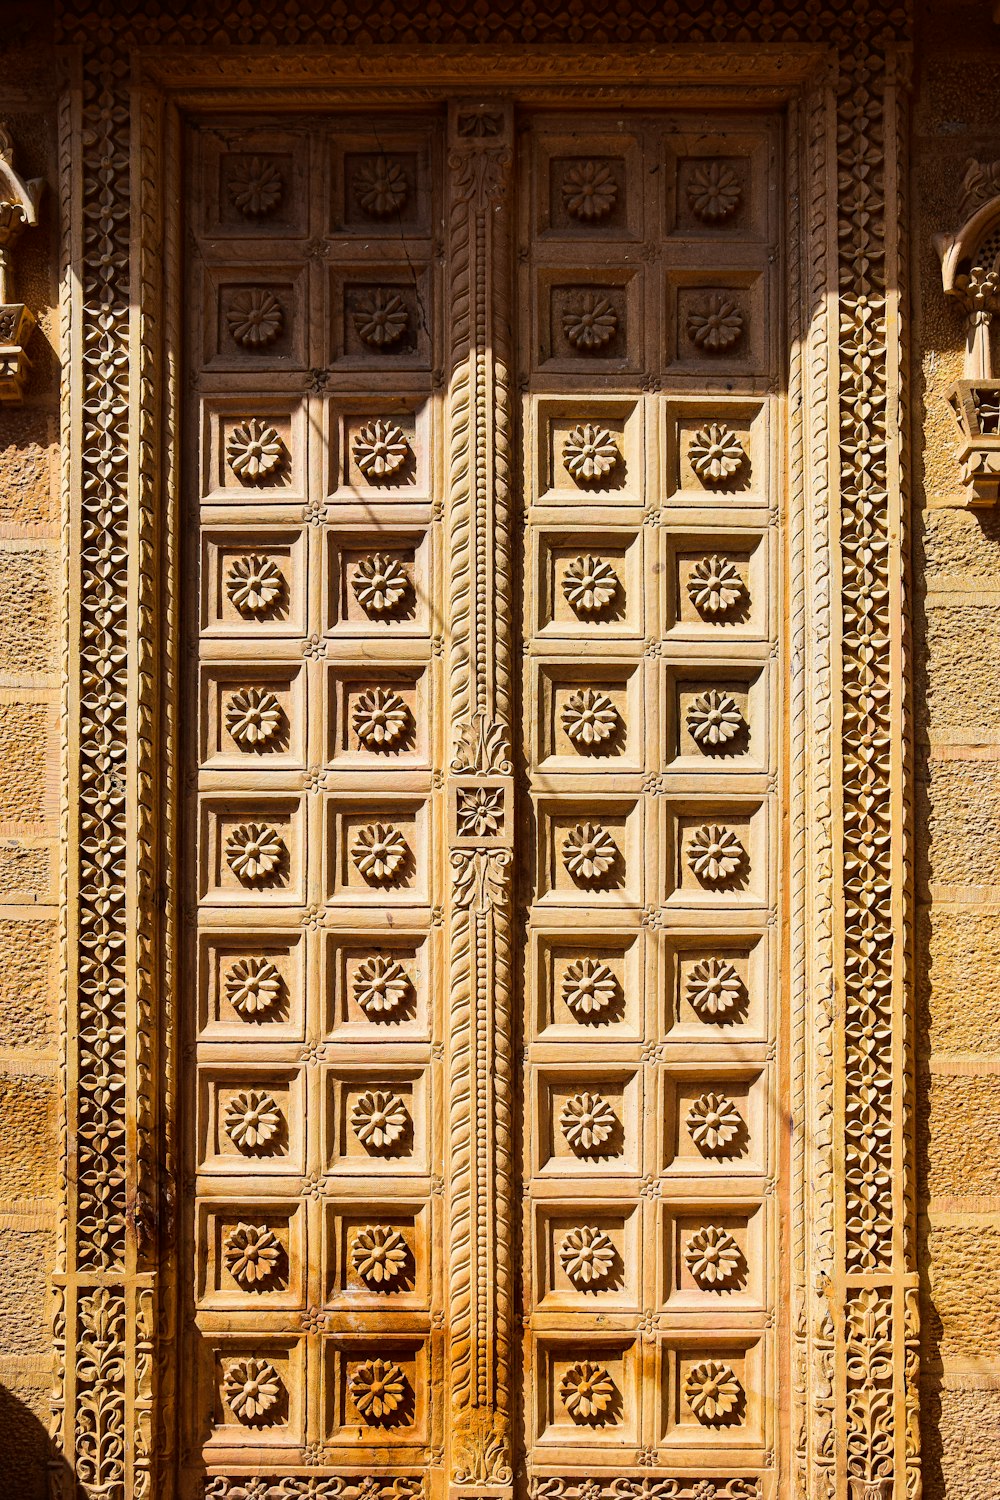 a large wooden door with intricate carvings on it